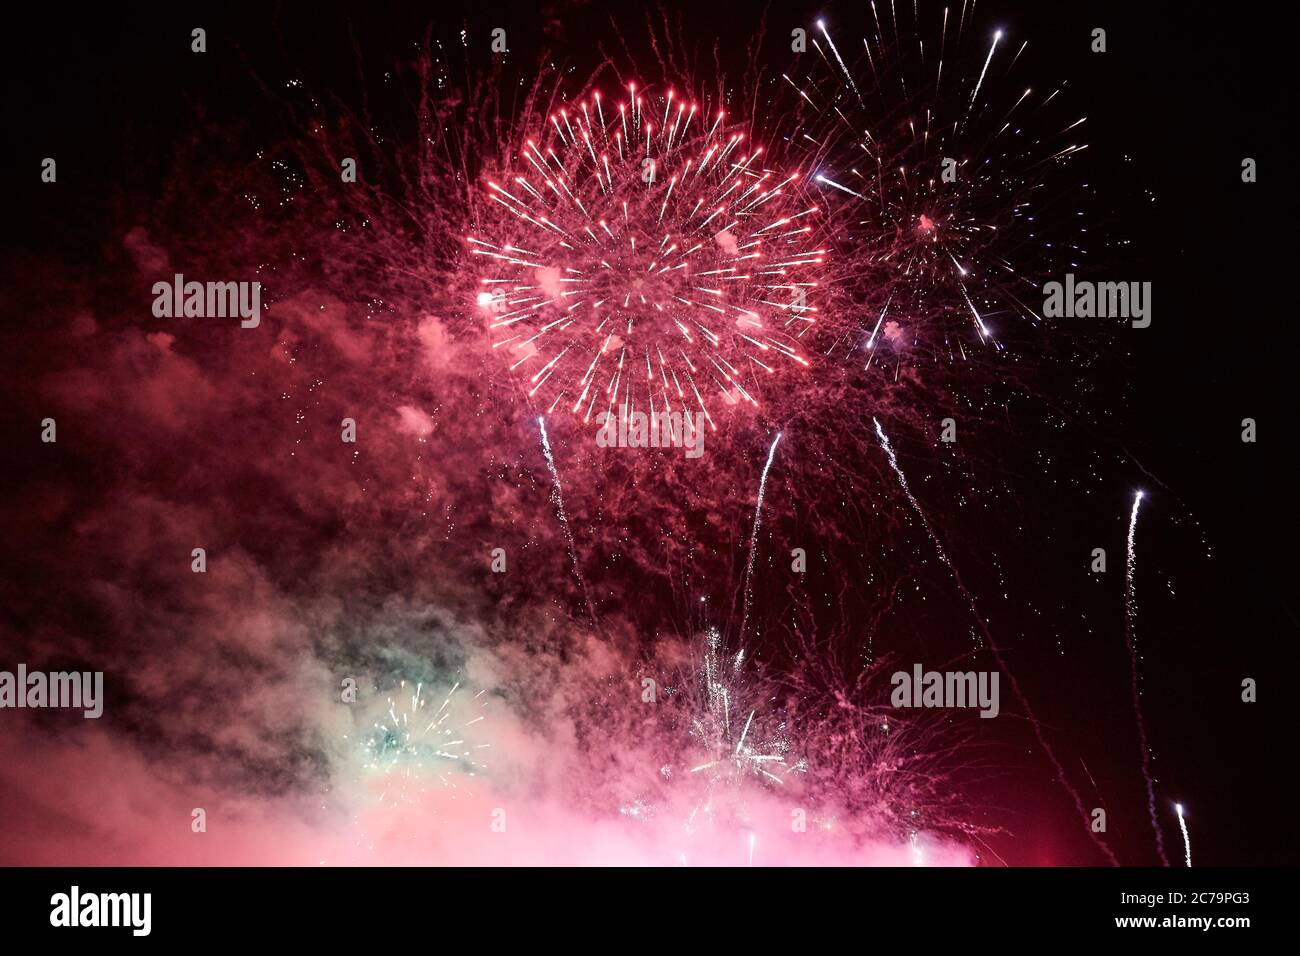 Fireworks for the holiday from different colorful explosions in the night sky Stock Photo